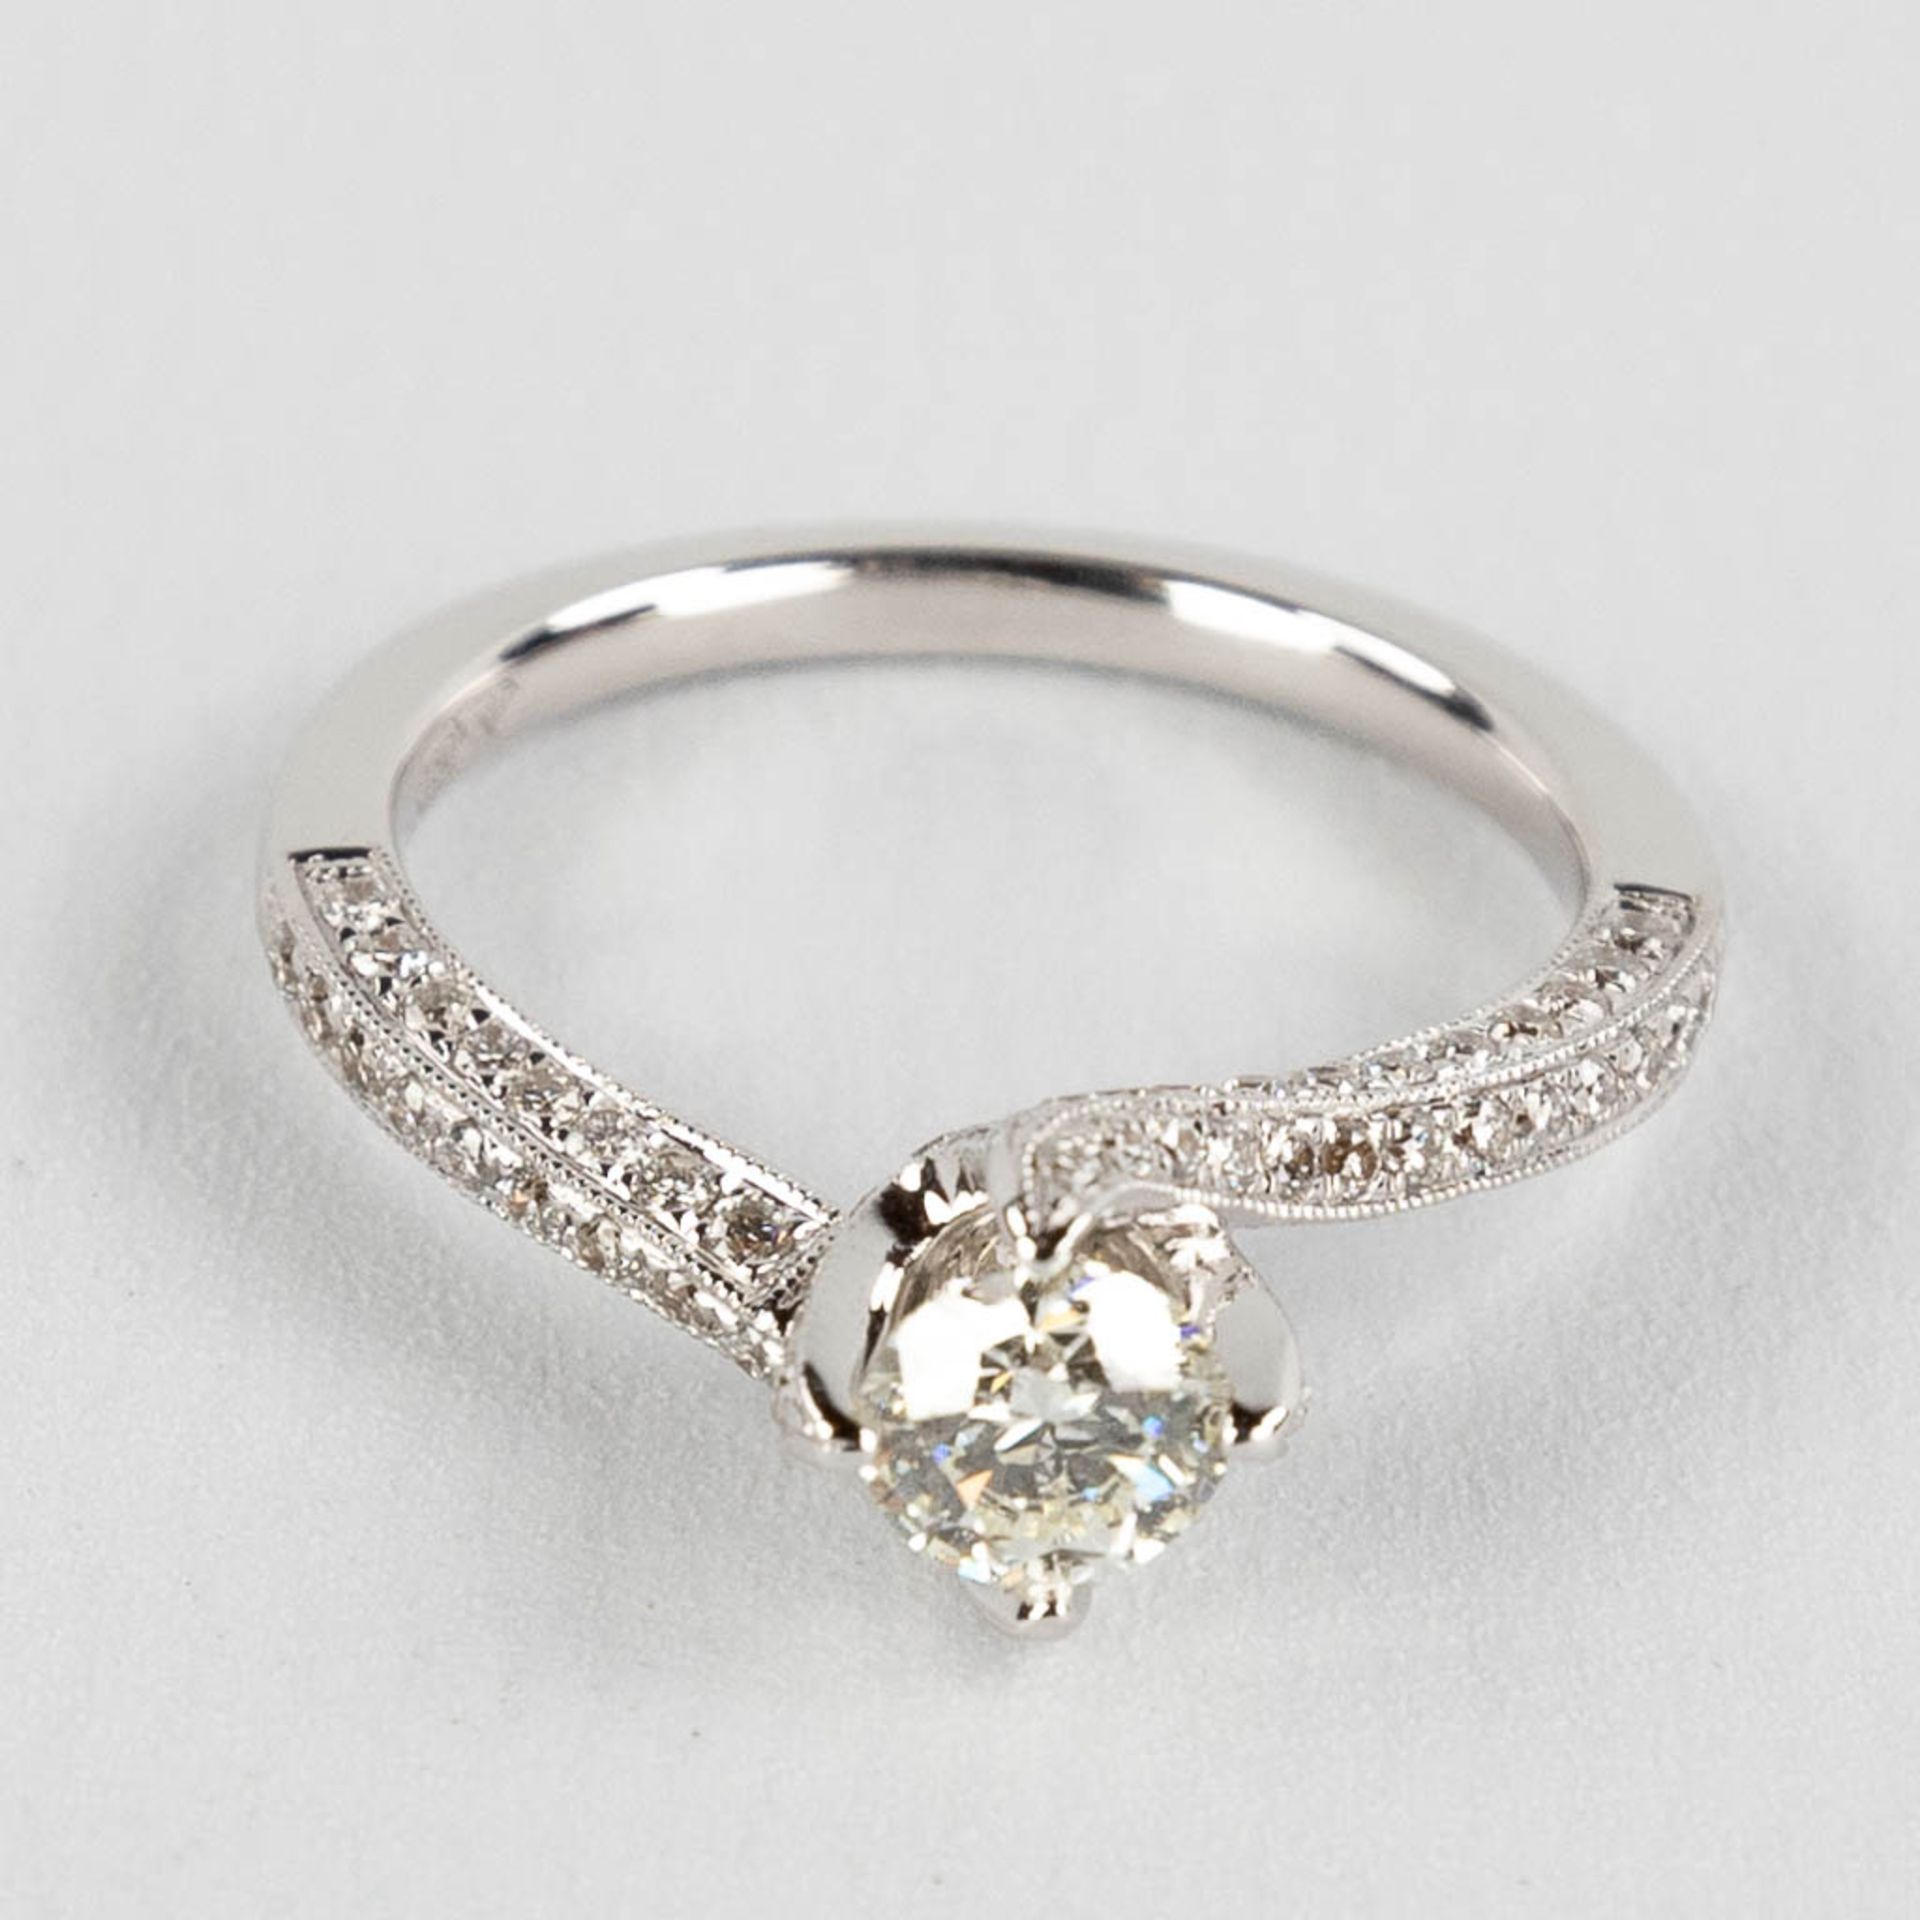 A ring, white gold with brilliant cut diamonds, central stone approximately 0,5ct, total appr. 0,53c